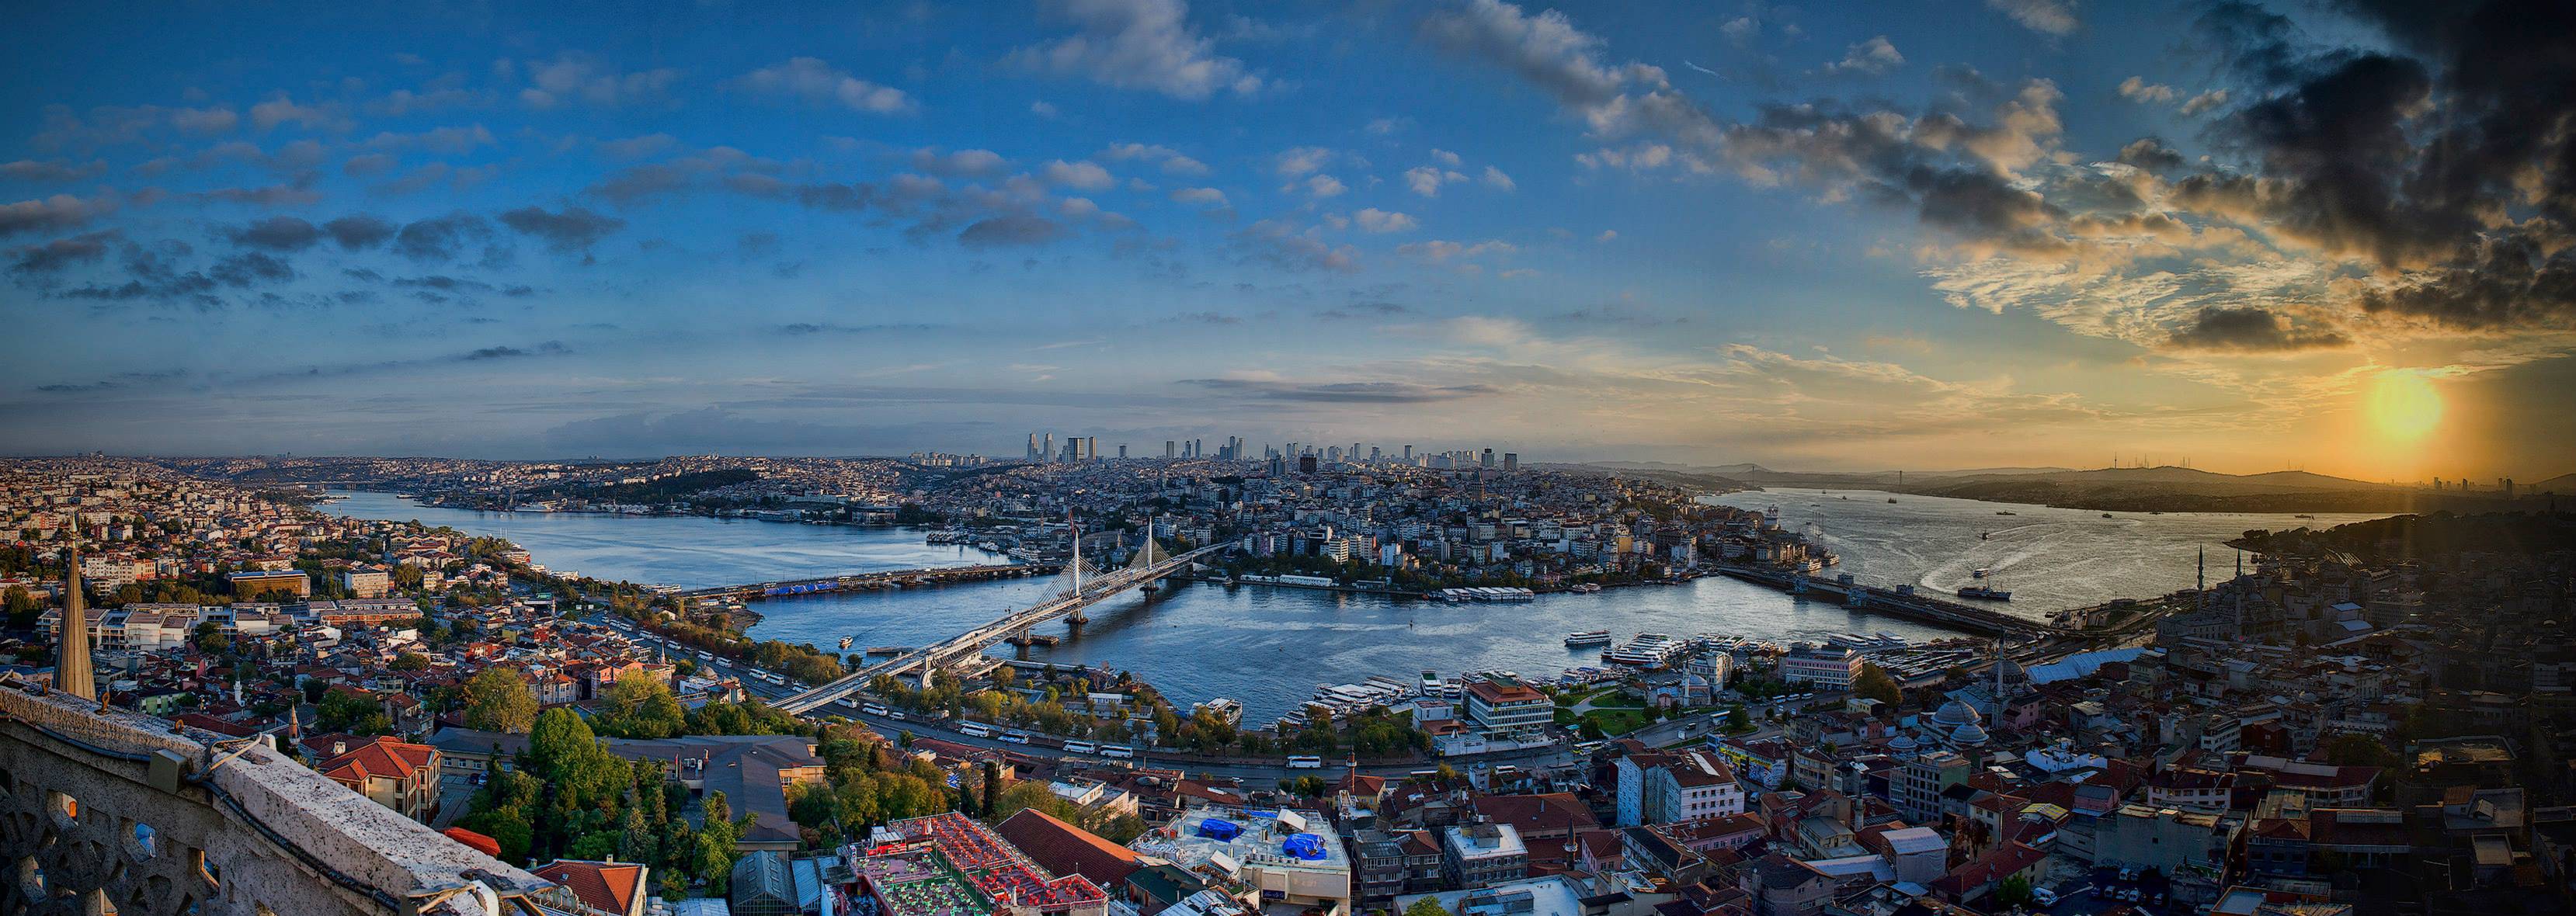 Istanbul wallpaper HD background download Facebook Covers